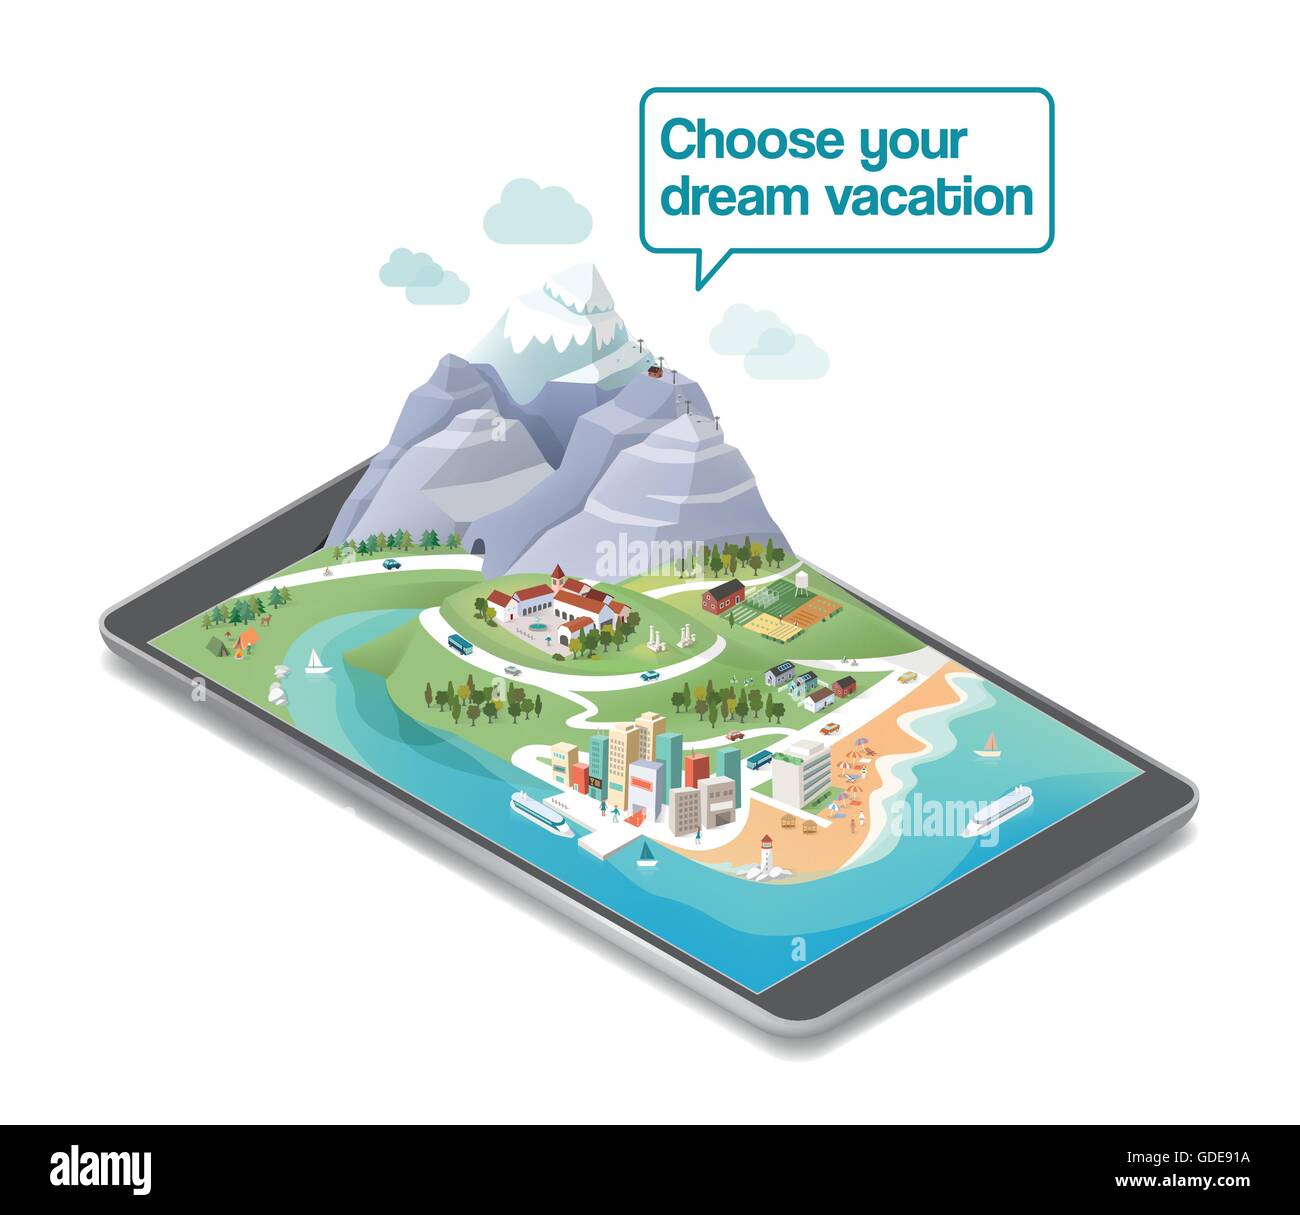 Choose your dream vacation, landscape on a tousch screen tablet device Stock Vector